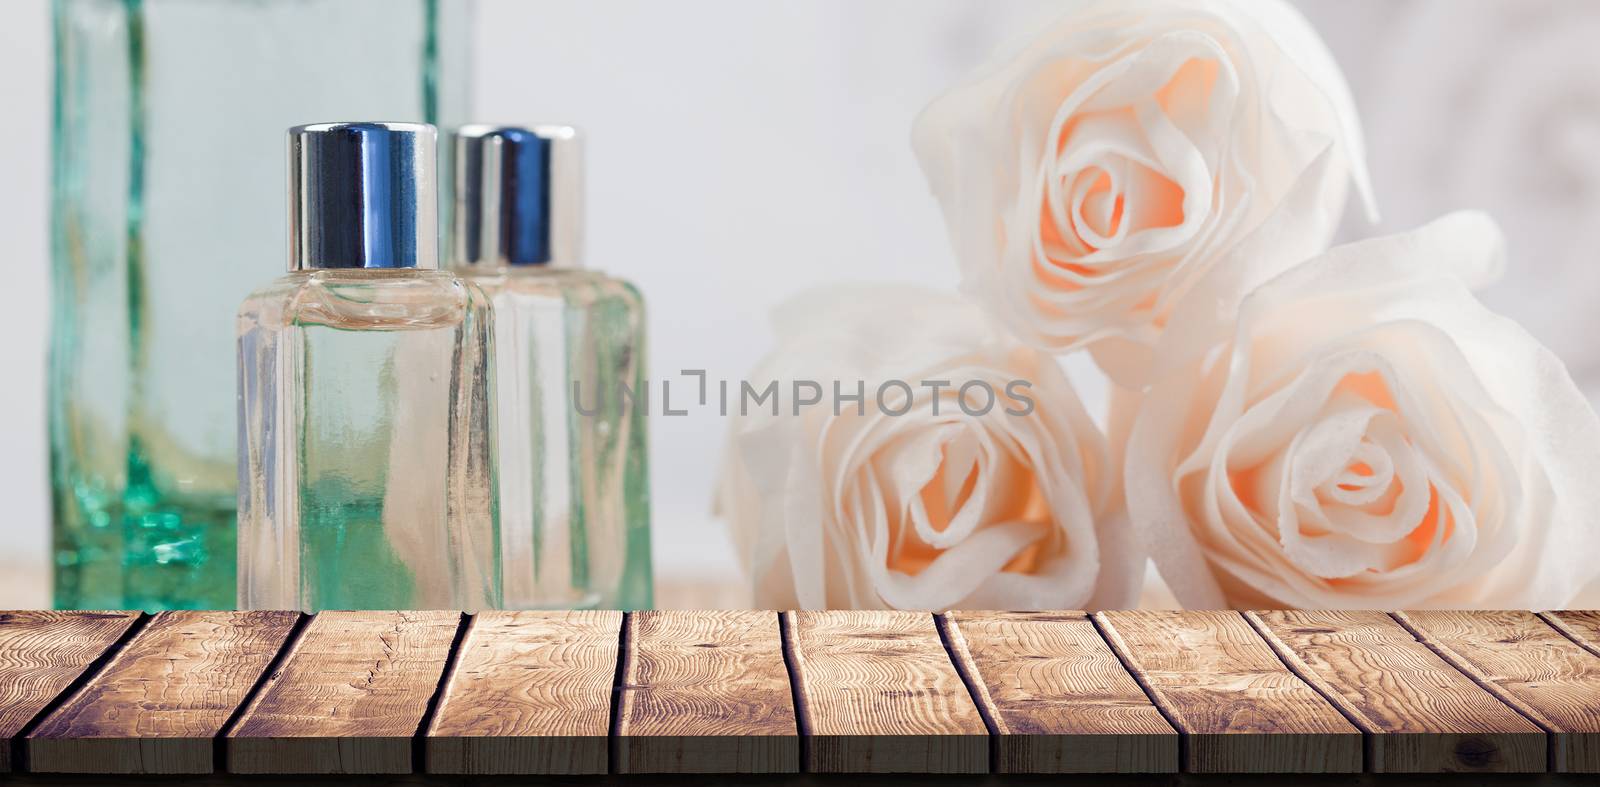 Wooden desk against glass jars and rose flowers in spa